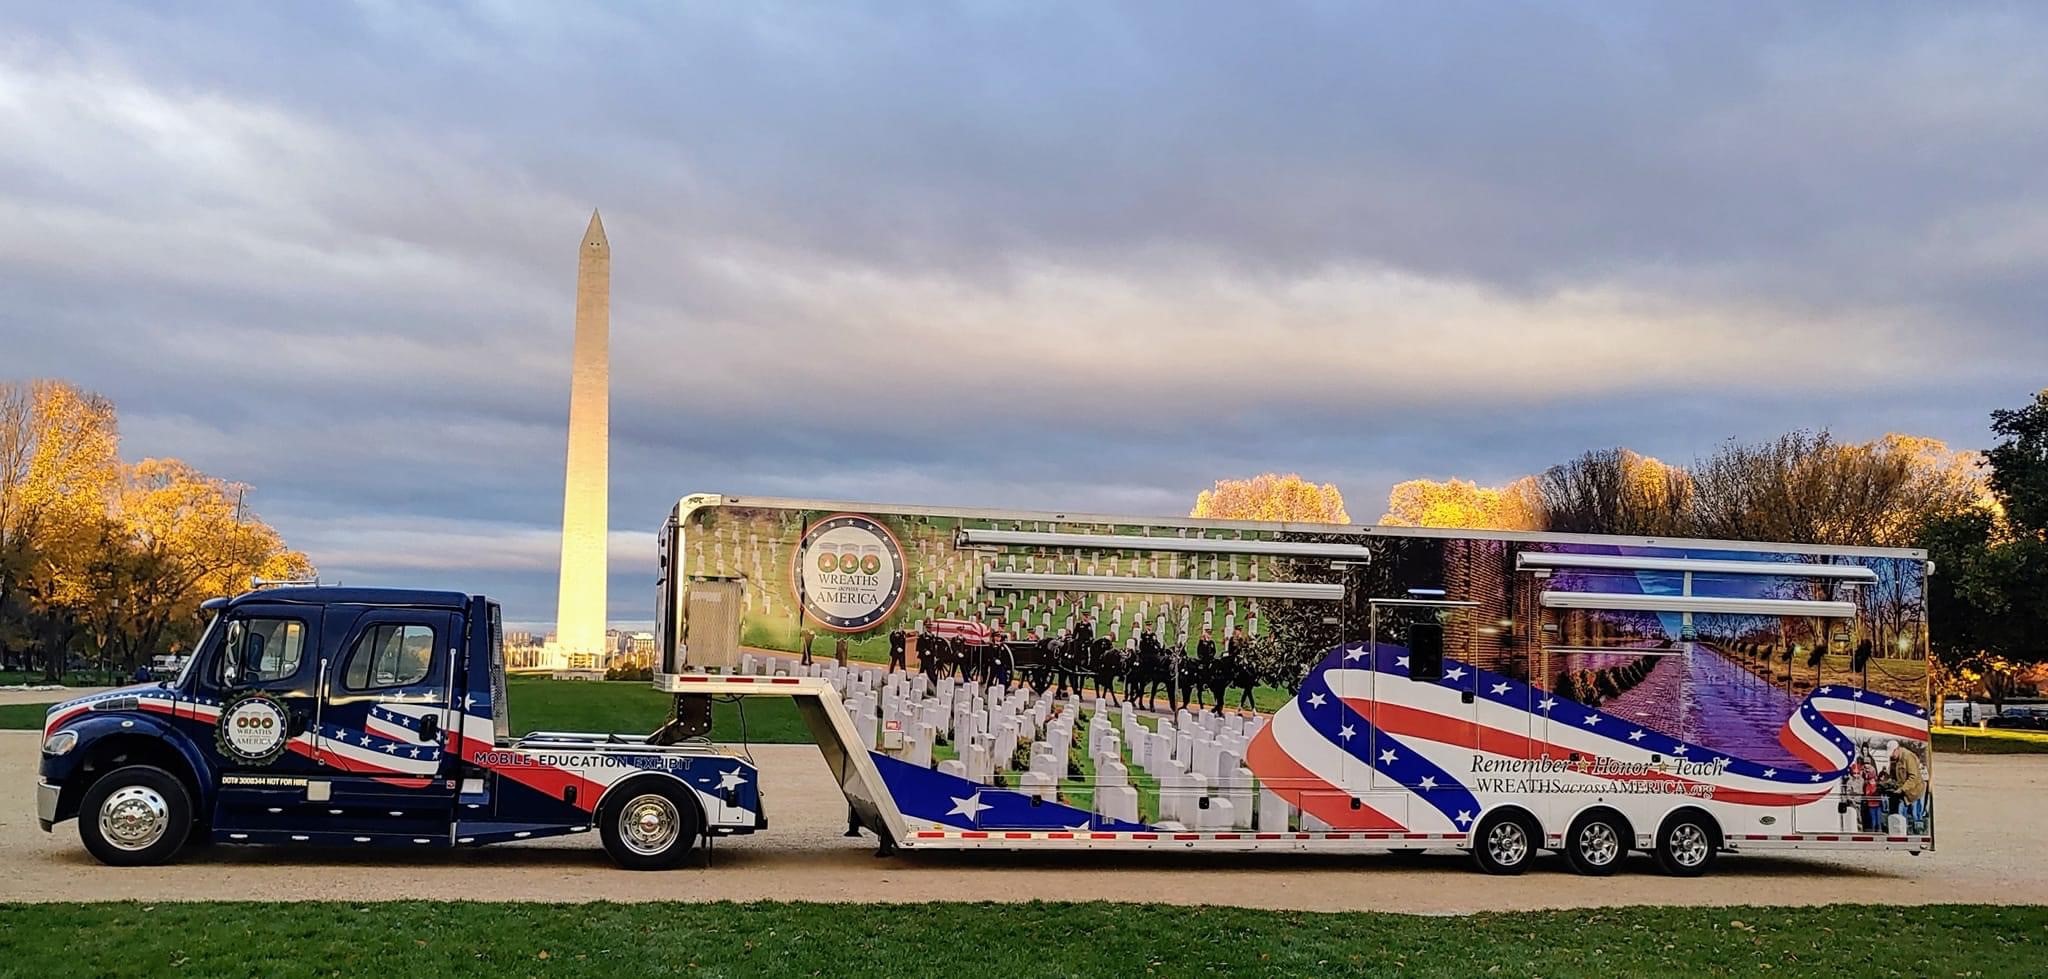 Wreaths Across America Mobile Education Exhibit Tour Honors Our Nation’s Veterans in Local Communities